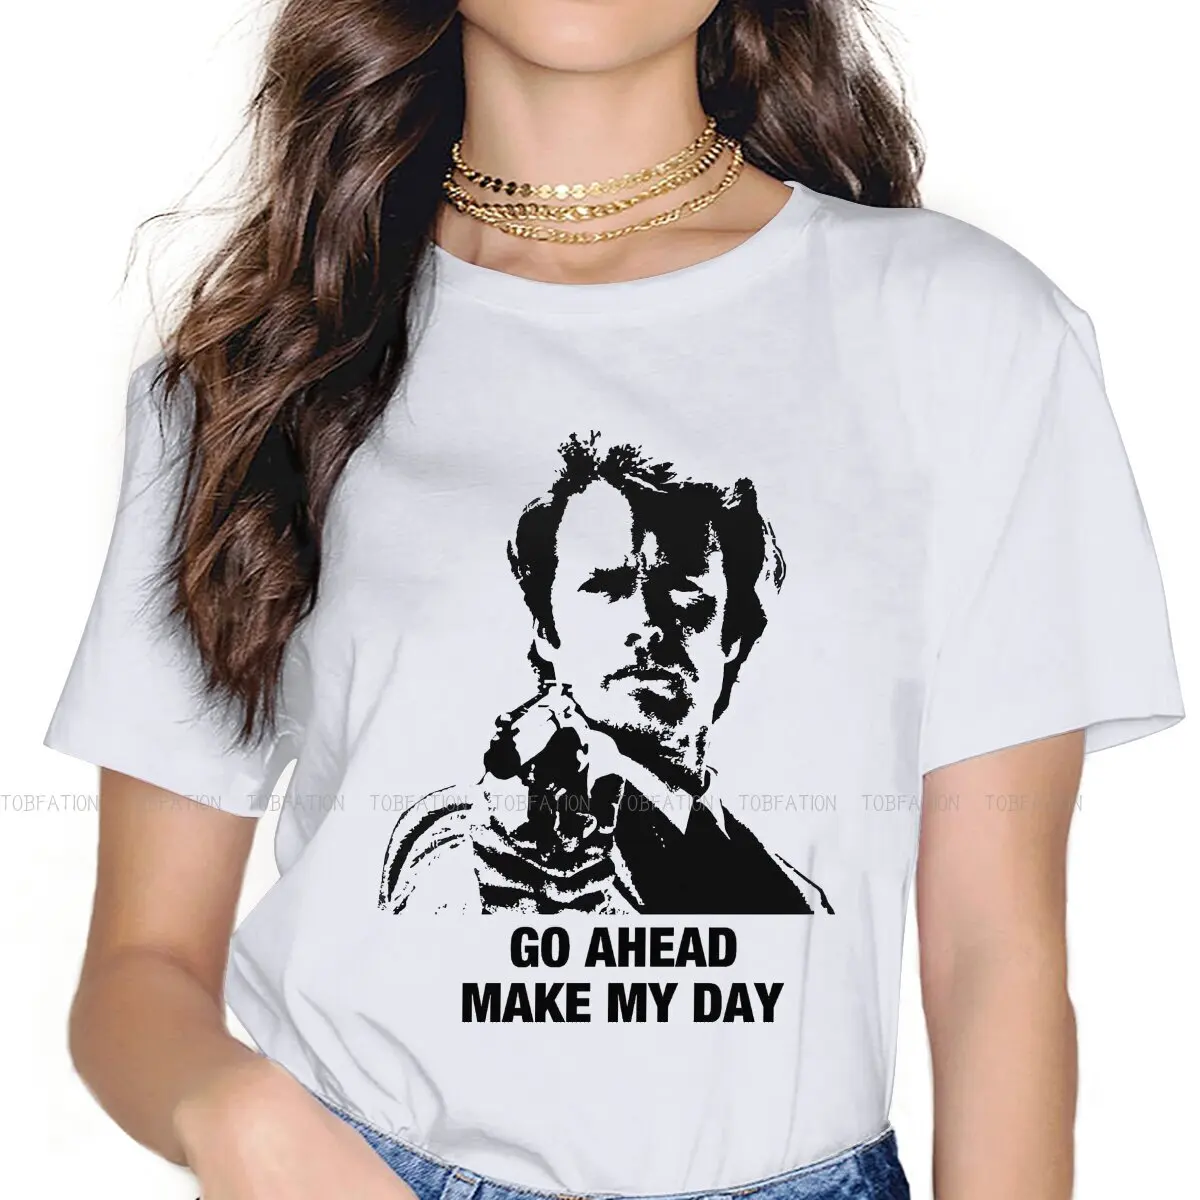 

Go Ahead Make My Day Dirty Harry Casual TShirt Clint Eastwood A Fistful Of Dollars Cowboy Creative Tops Leisure T Shirt Women